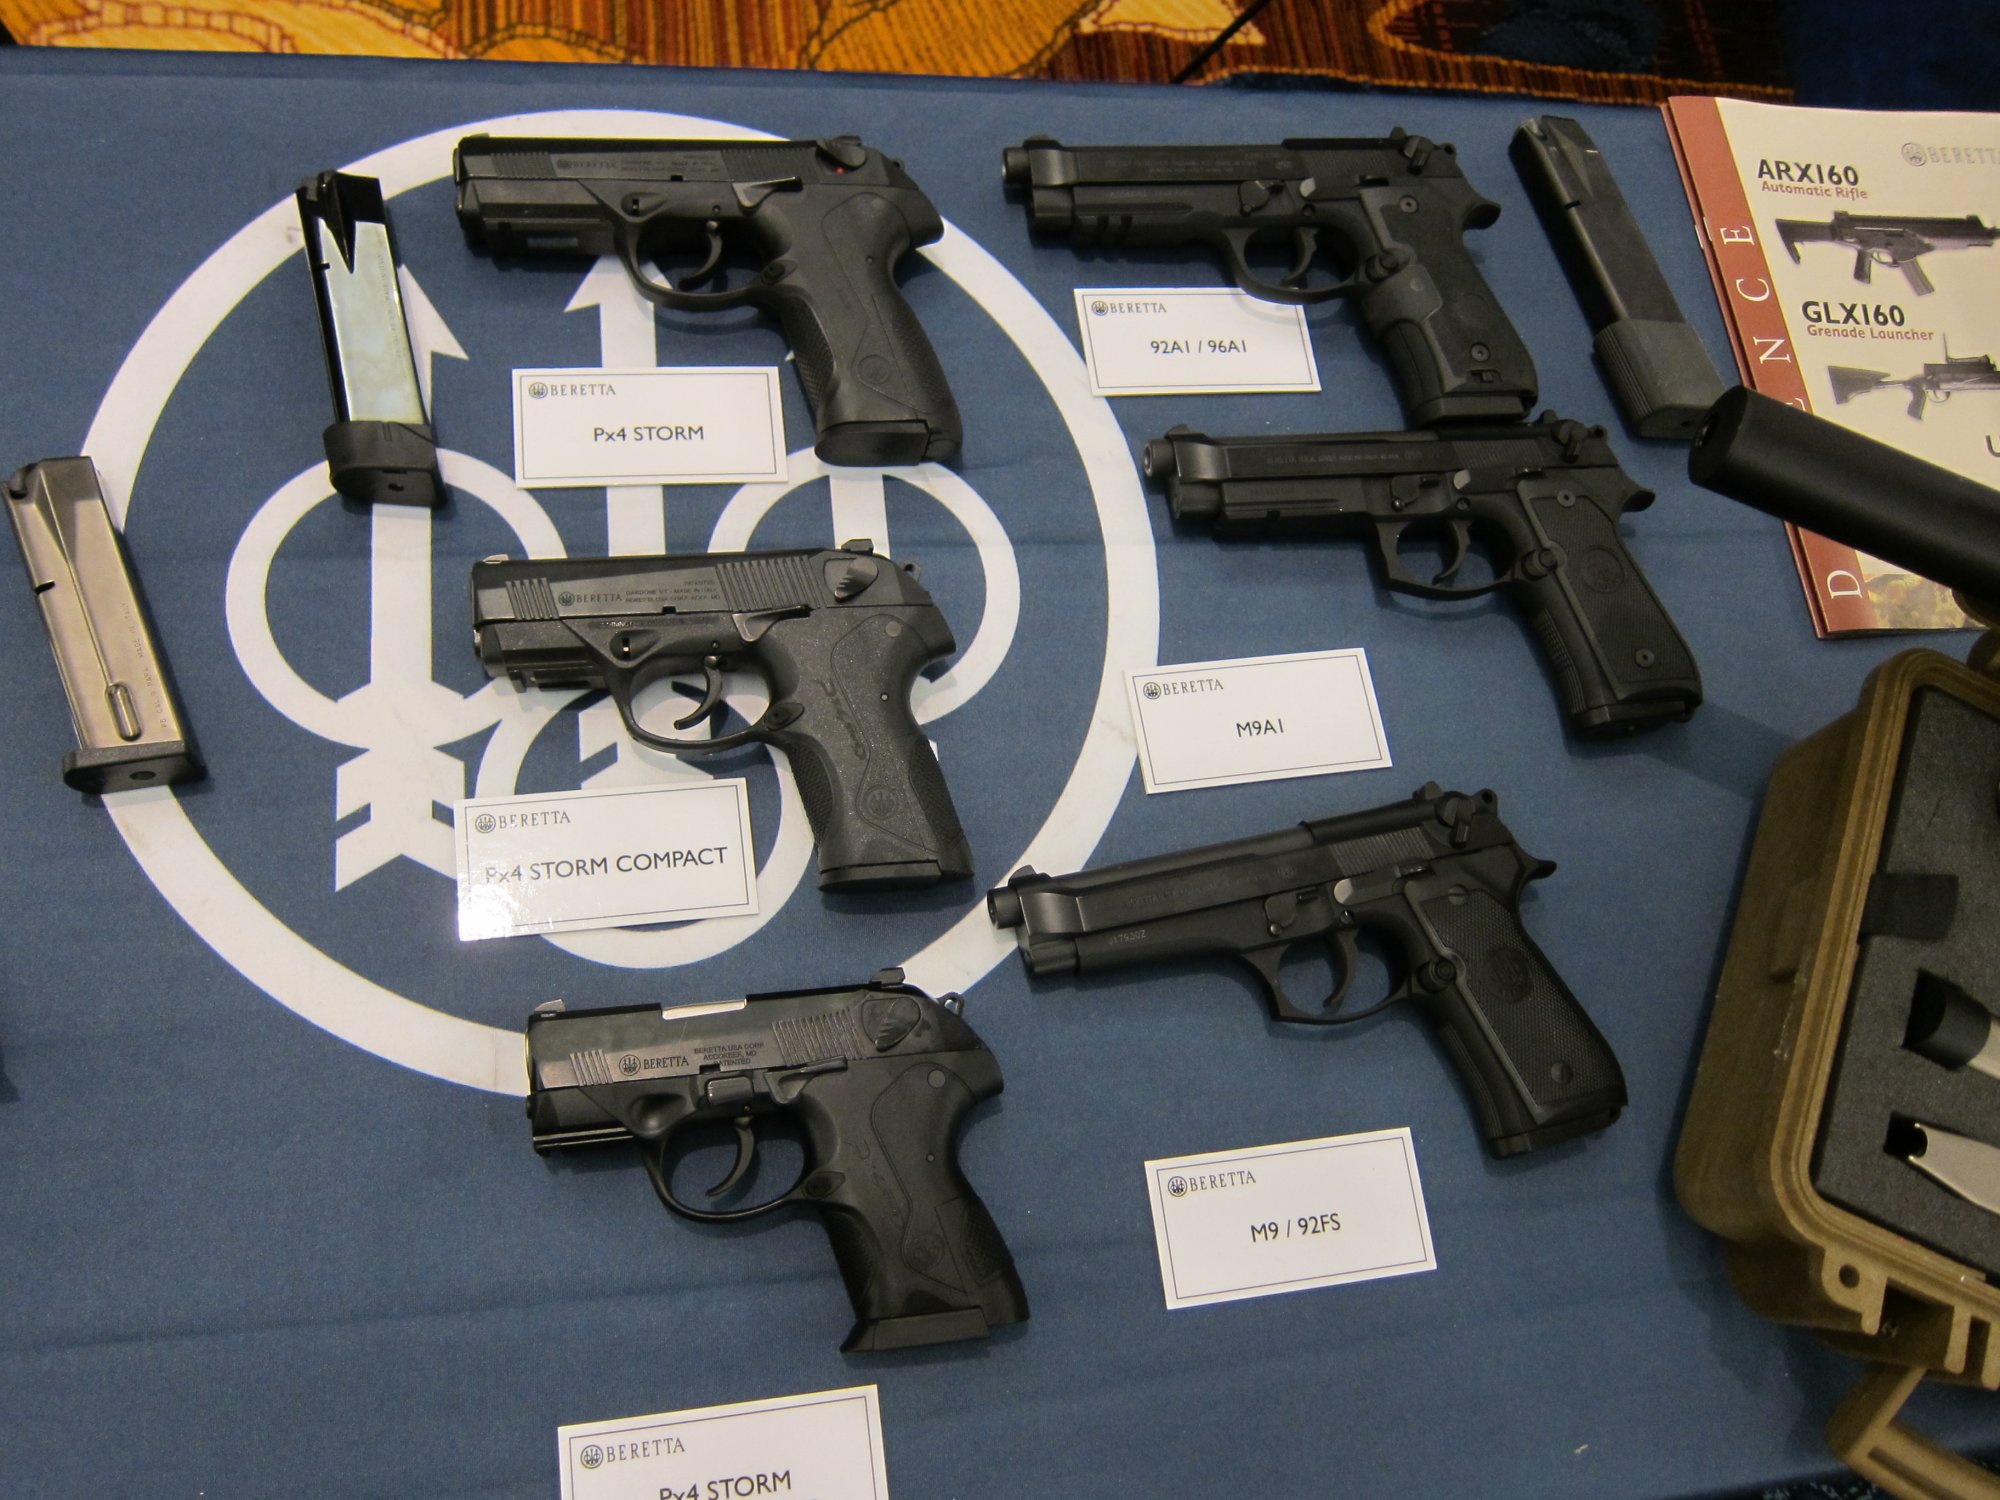 Beretta_PX4_Storm_Standard_Compact_and_Subcompact_Tactical_Pistols_NDIA_Infantry_Small_Arms_Systems_Symposium_2011_DefenseReview.com_DR_11.jpg